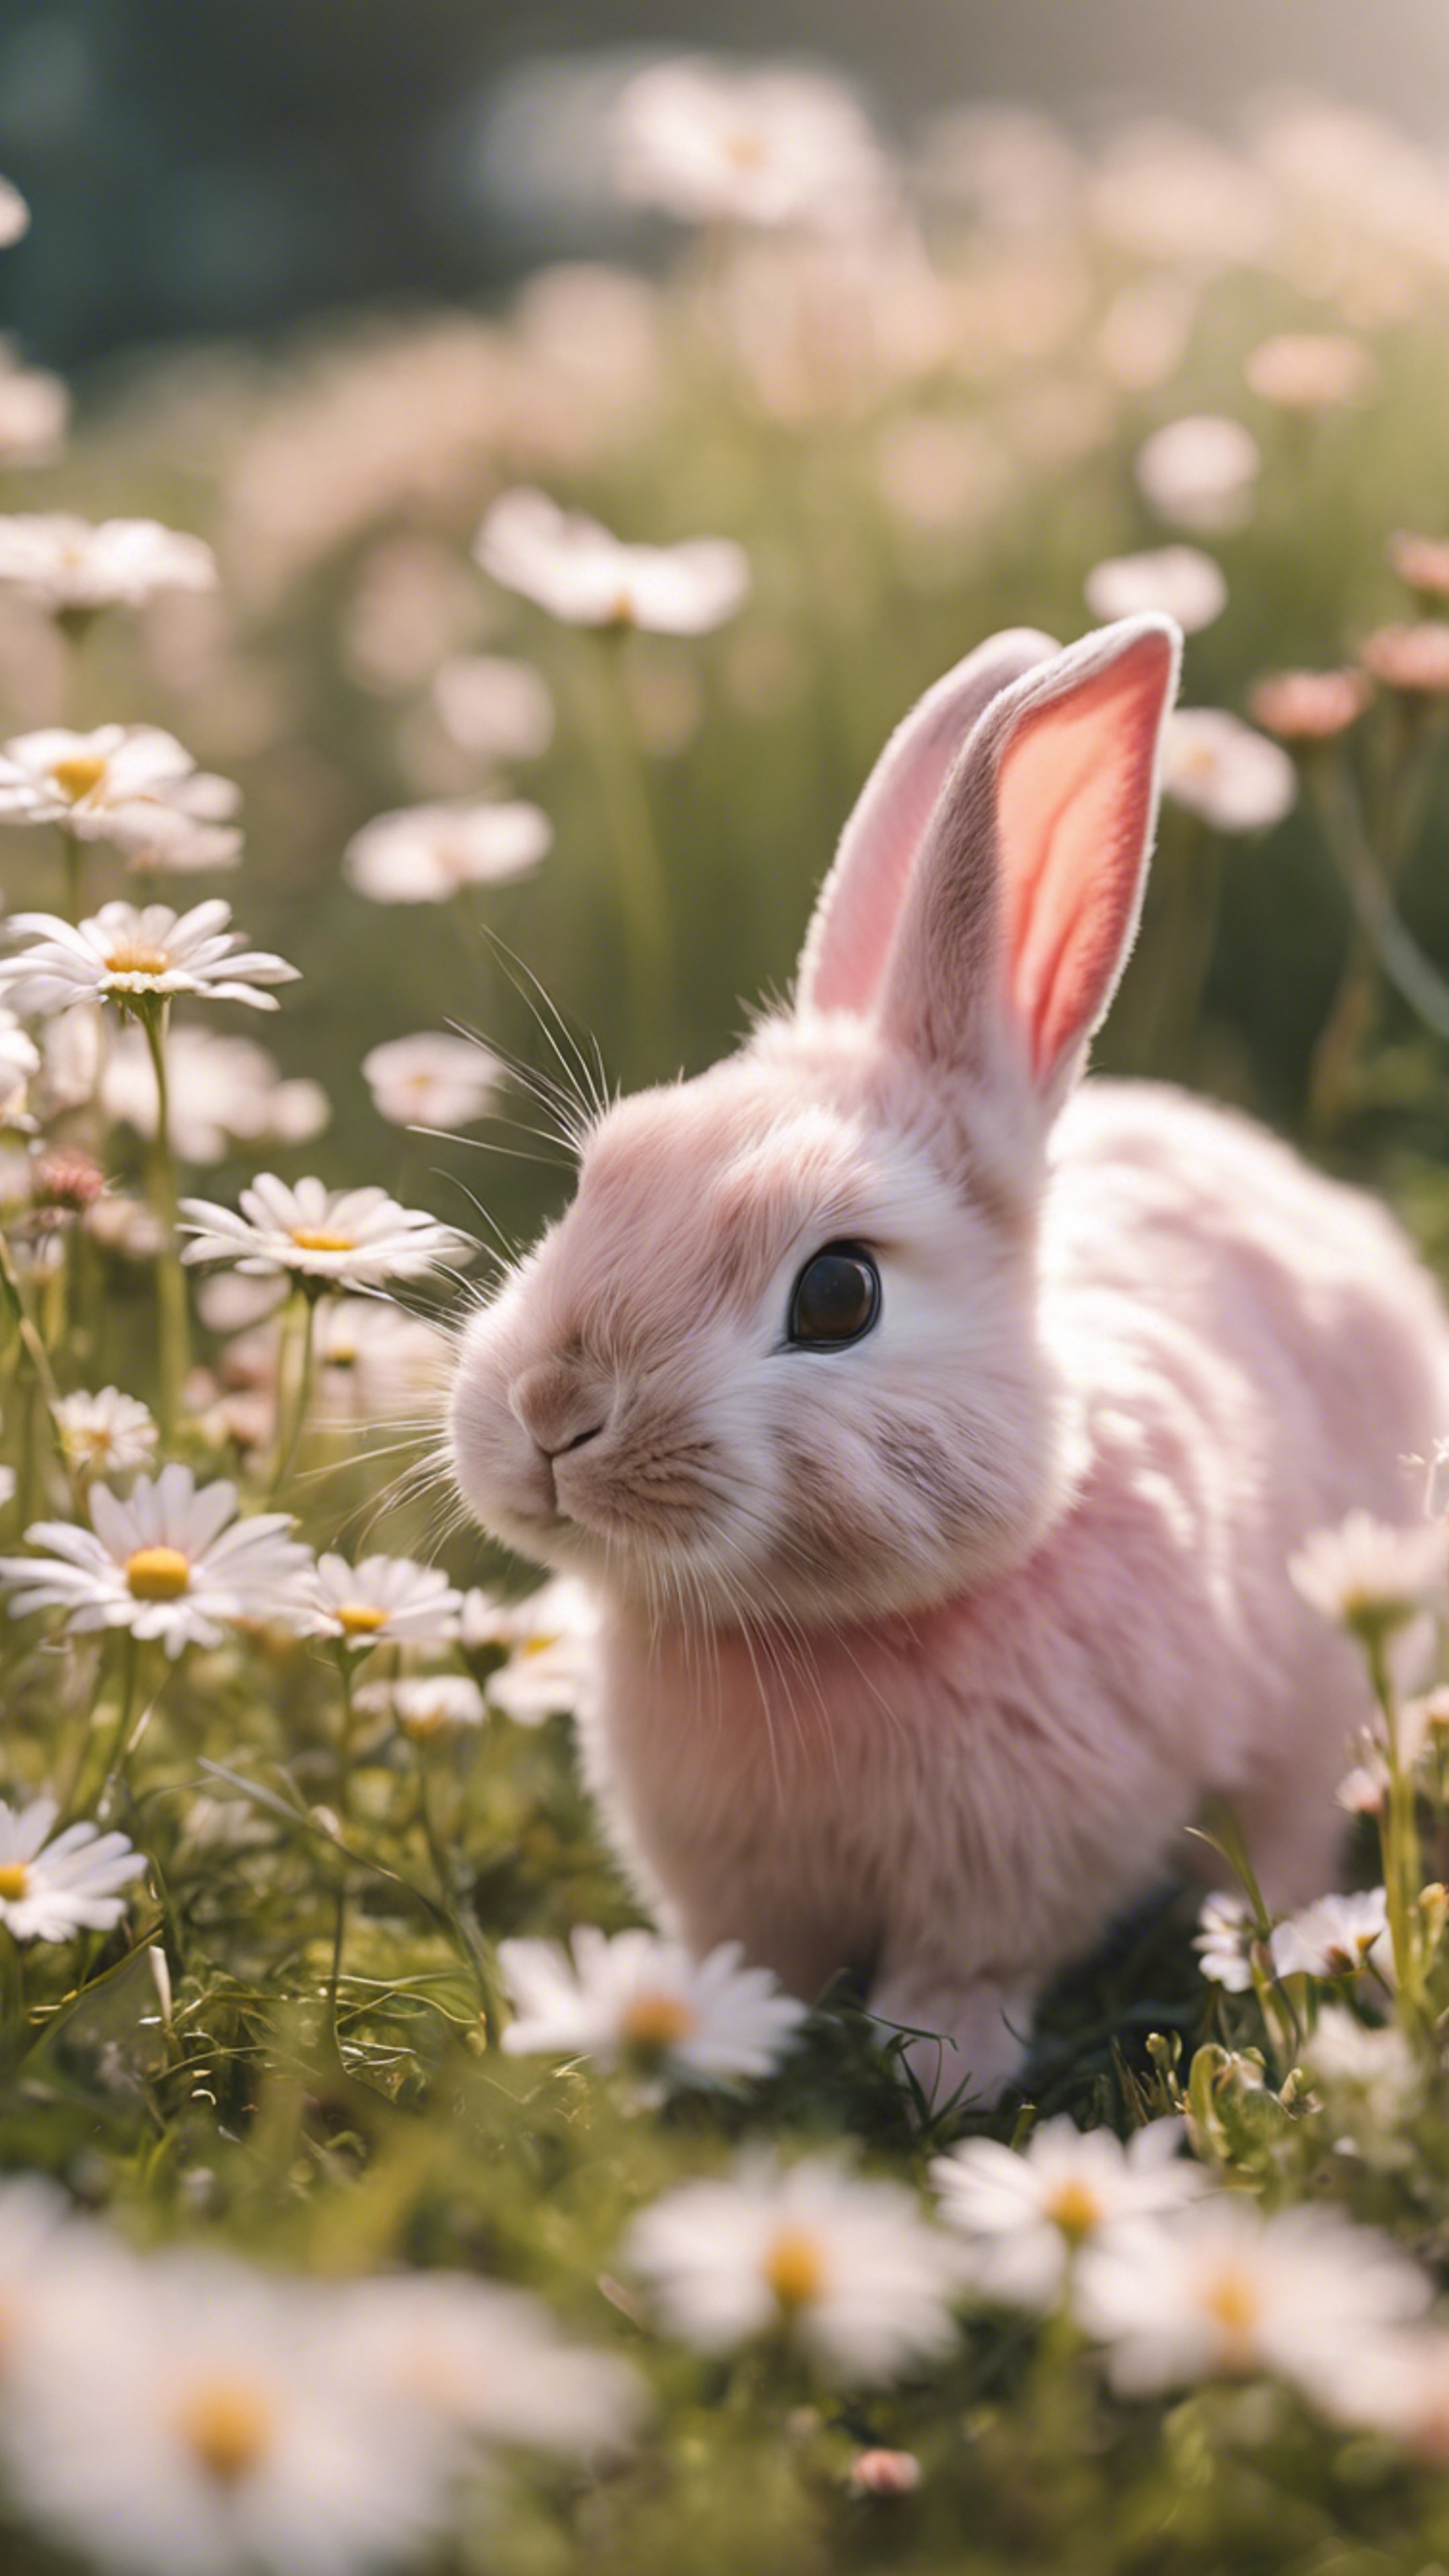 A pack of blush pink, Kawaii style rabbits happily playing in a field of daisies. Wallpaper[cf36497c89454393a51d]